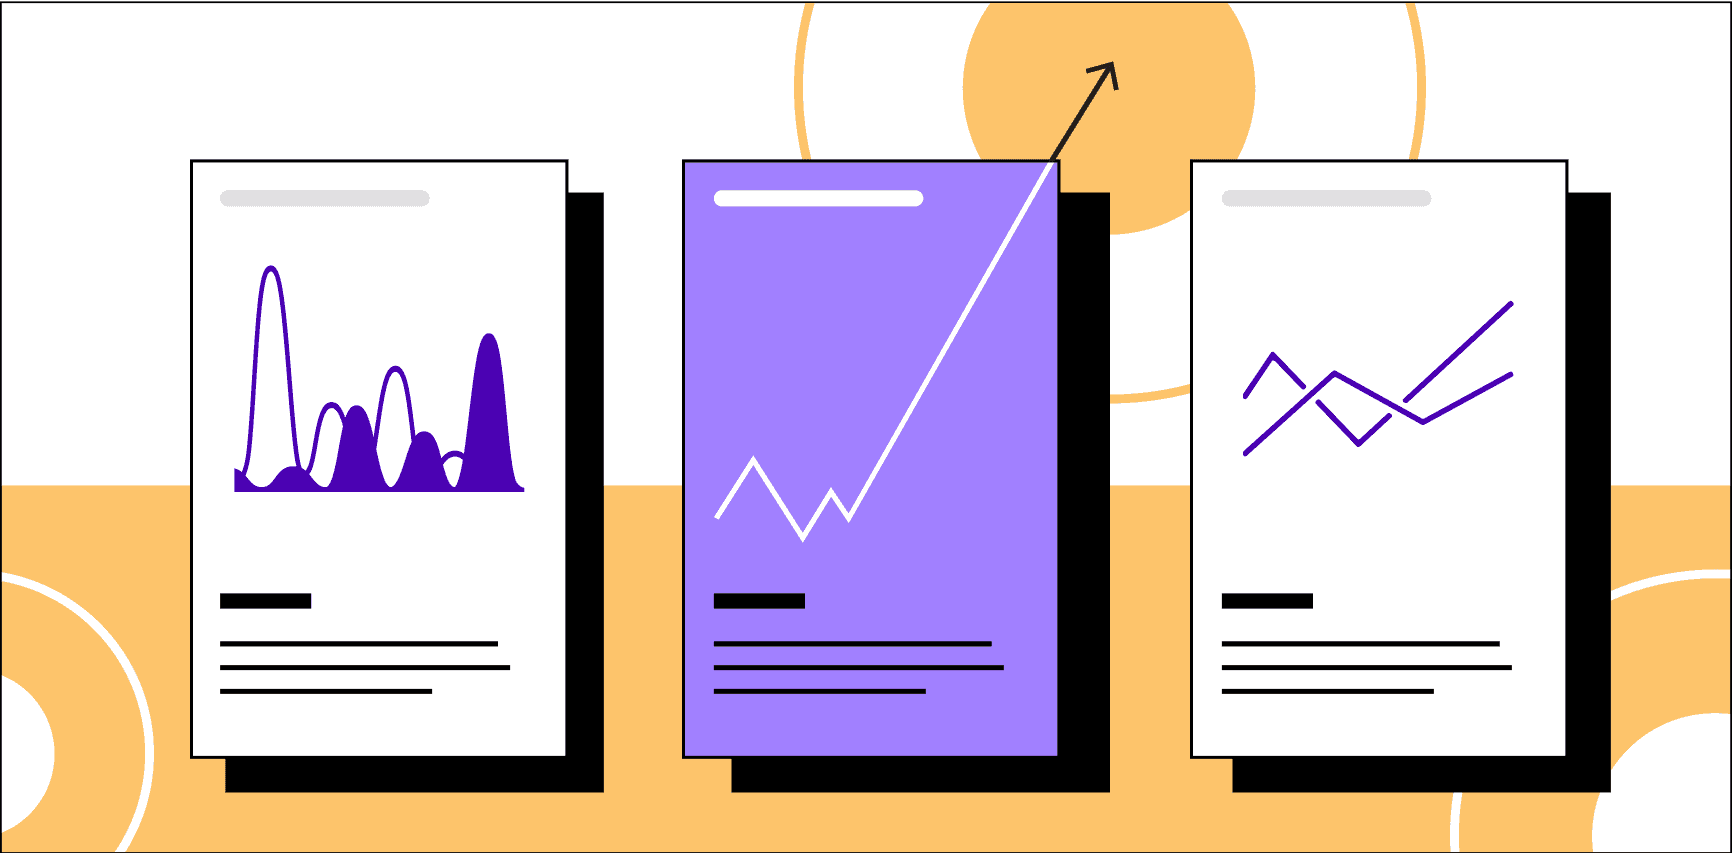 Three abstracted cards representing website performance sit side by side, each showing graphs and lines. The middle card has a graph with a line and arrow that suddenly moves up and off the page. Illustration.